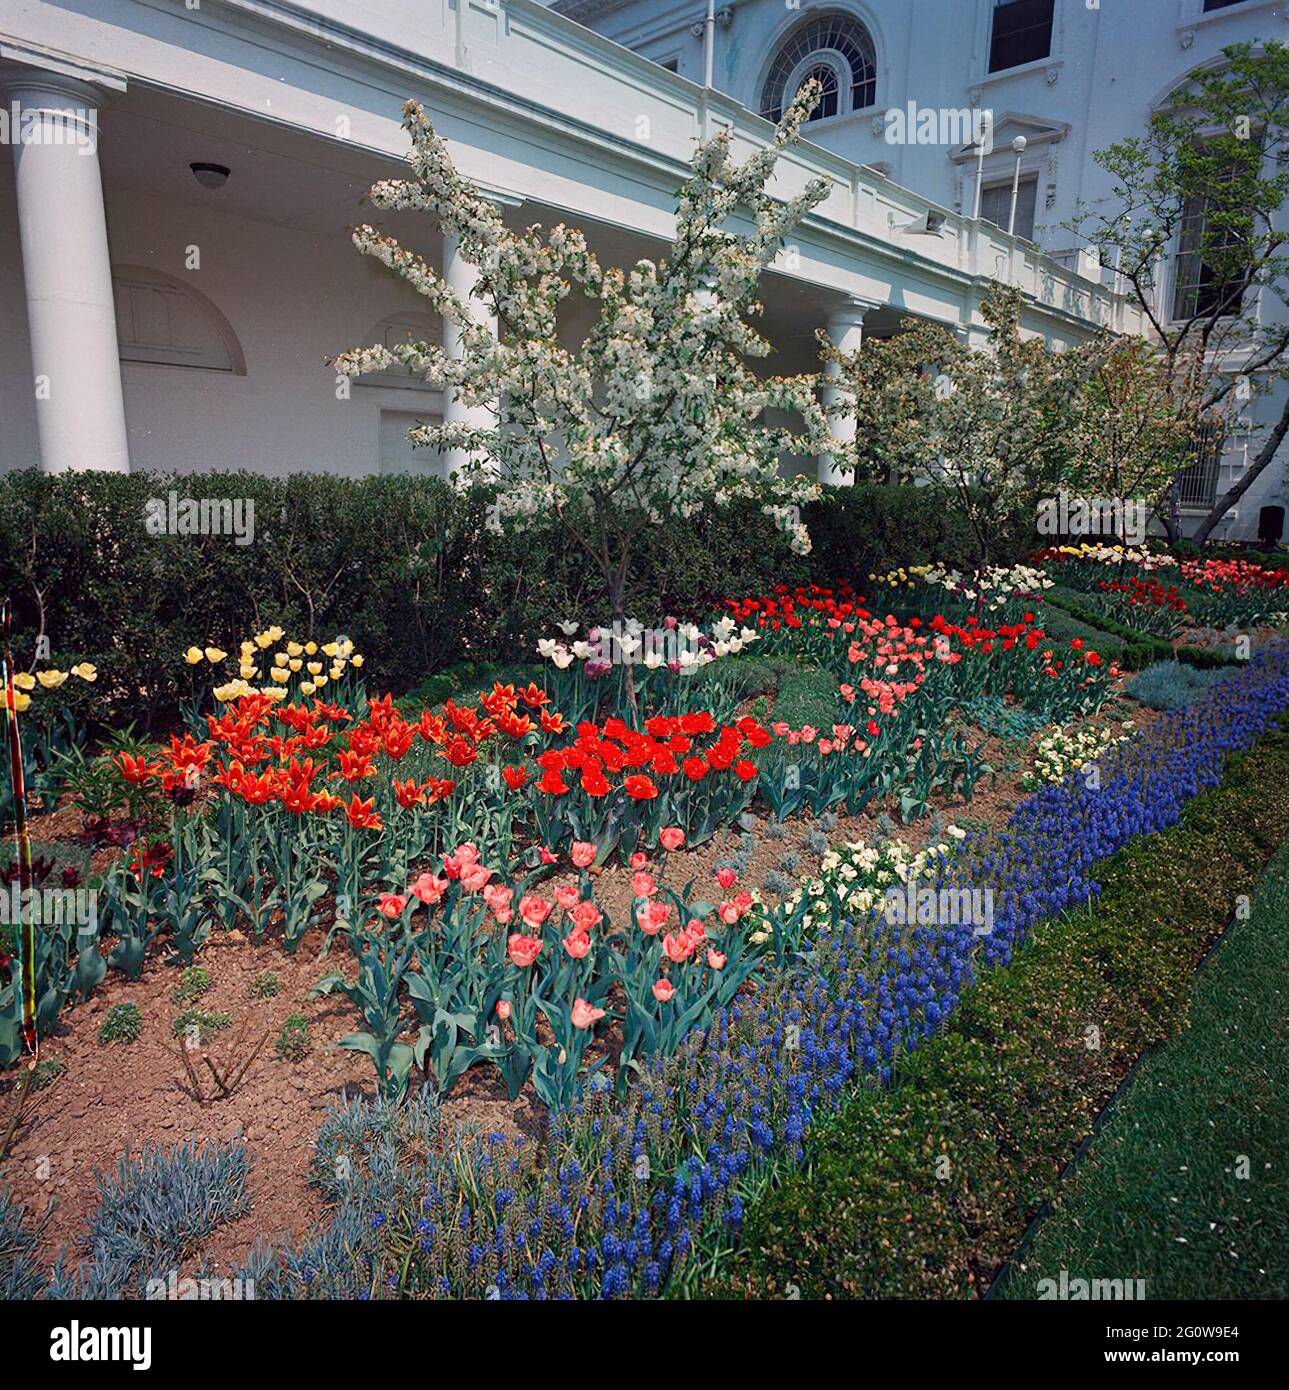 ST-C102-1-63                 18 April 1963  Rose Garden, views. [Discolored streak on left side of image is original to the negative.]  Please credit 'Cecil Stoughton. White House Photographs. John F. Kennedy Presidential Library and Museum, Boston' Stock Photo